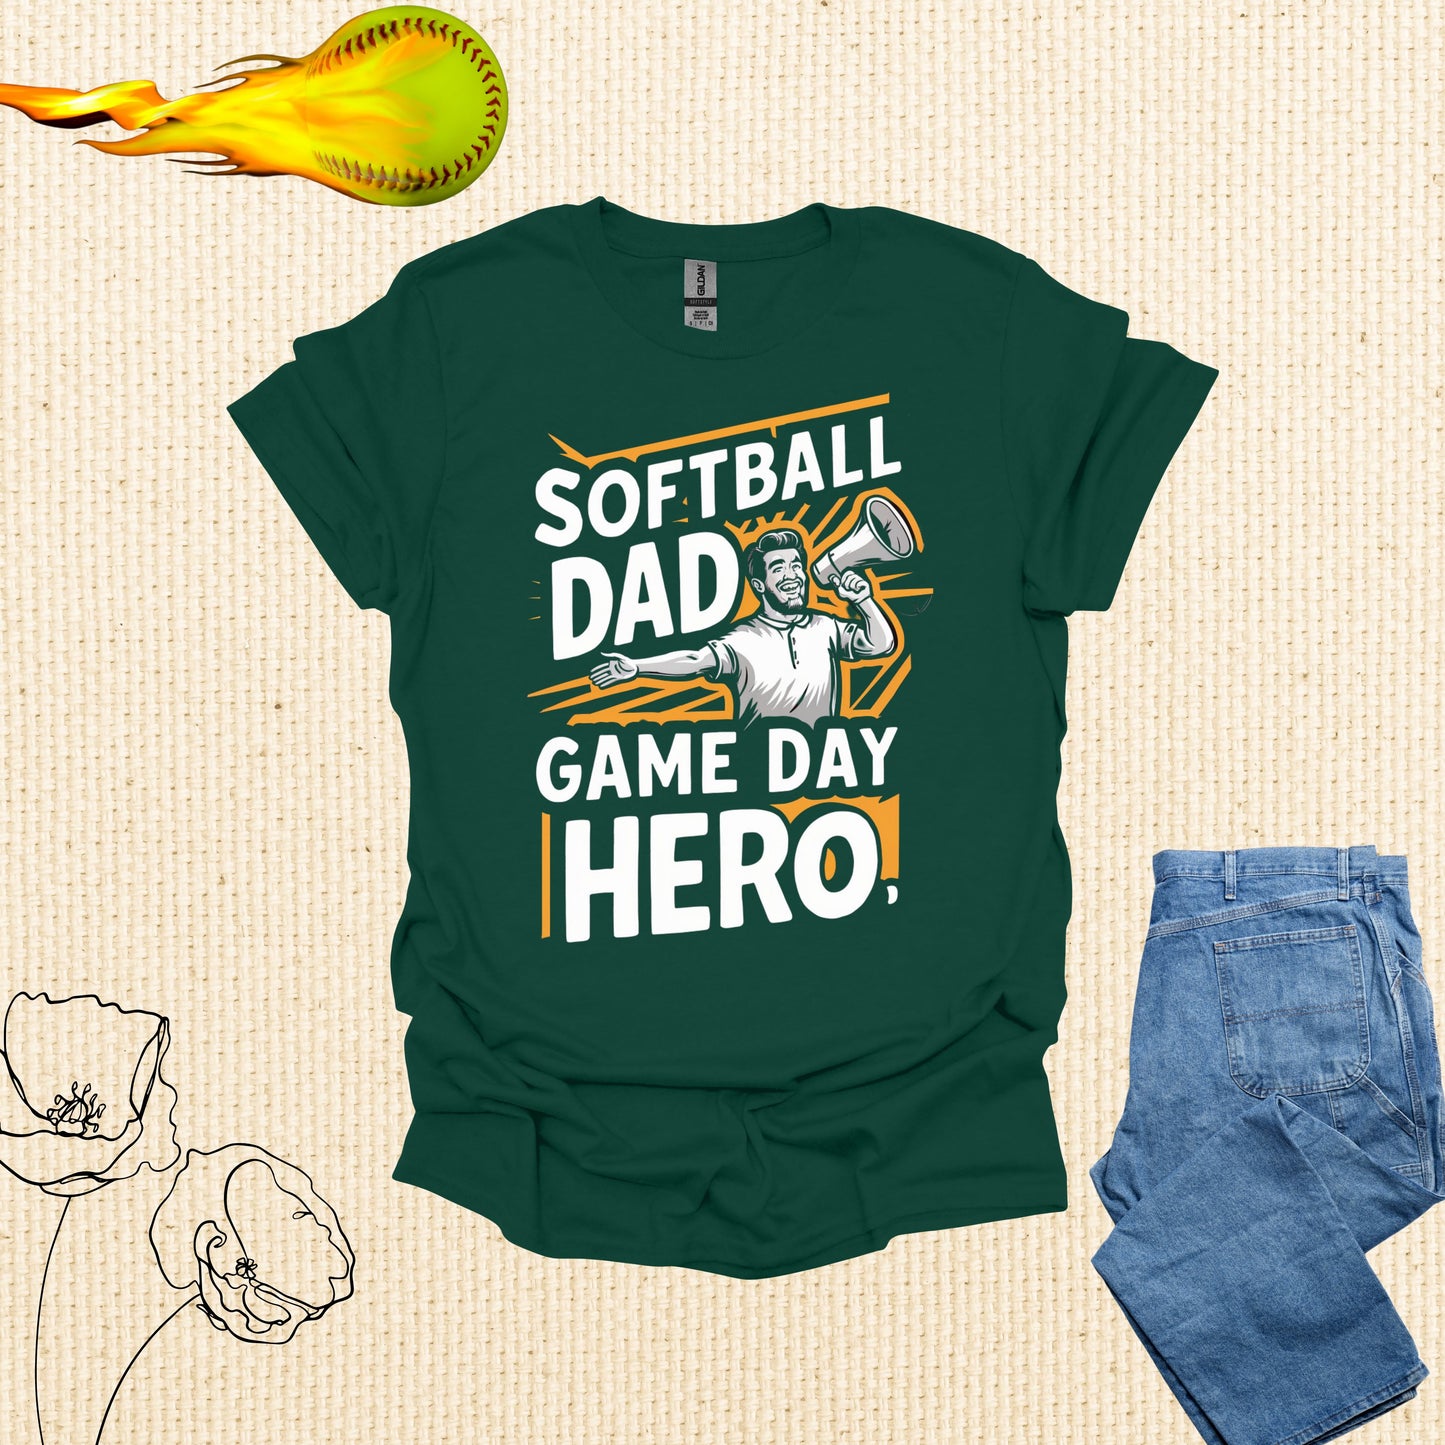 Softball Dad Forest Green Shirt - Game Day Hero